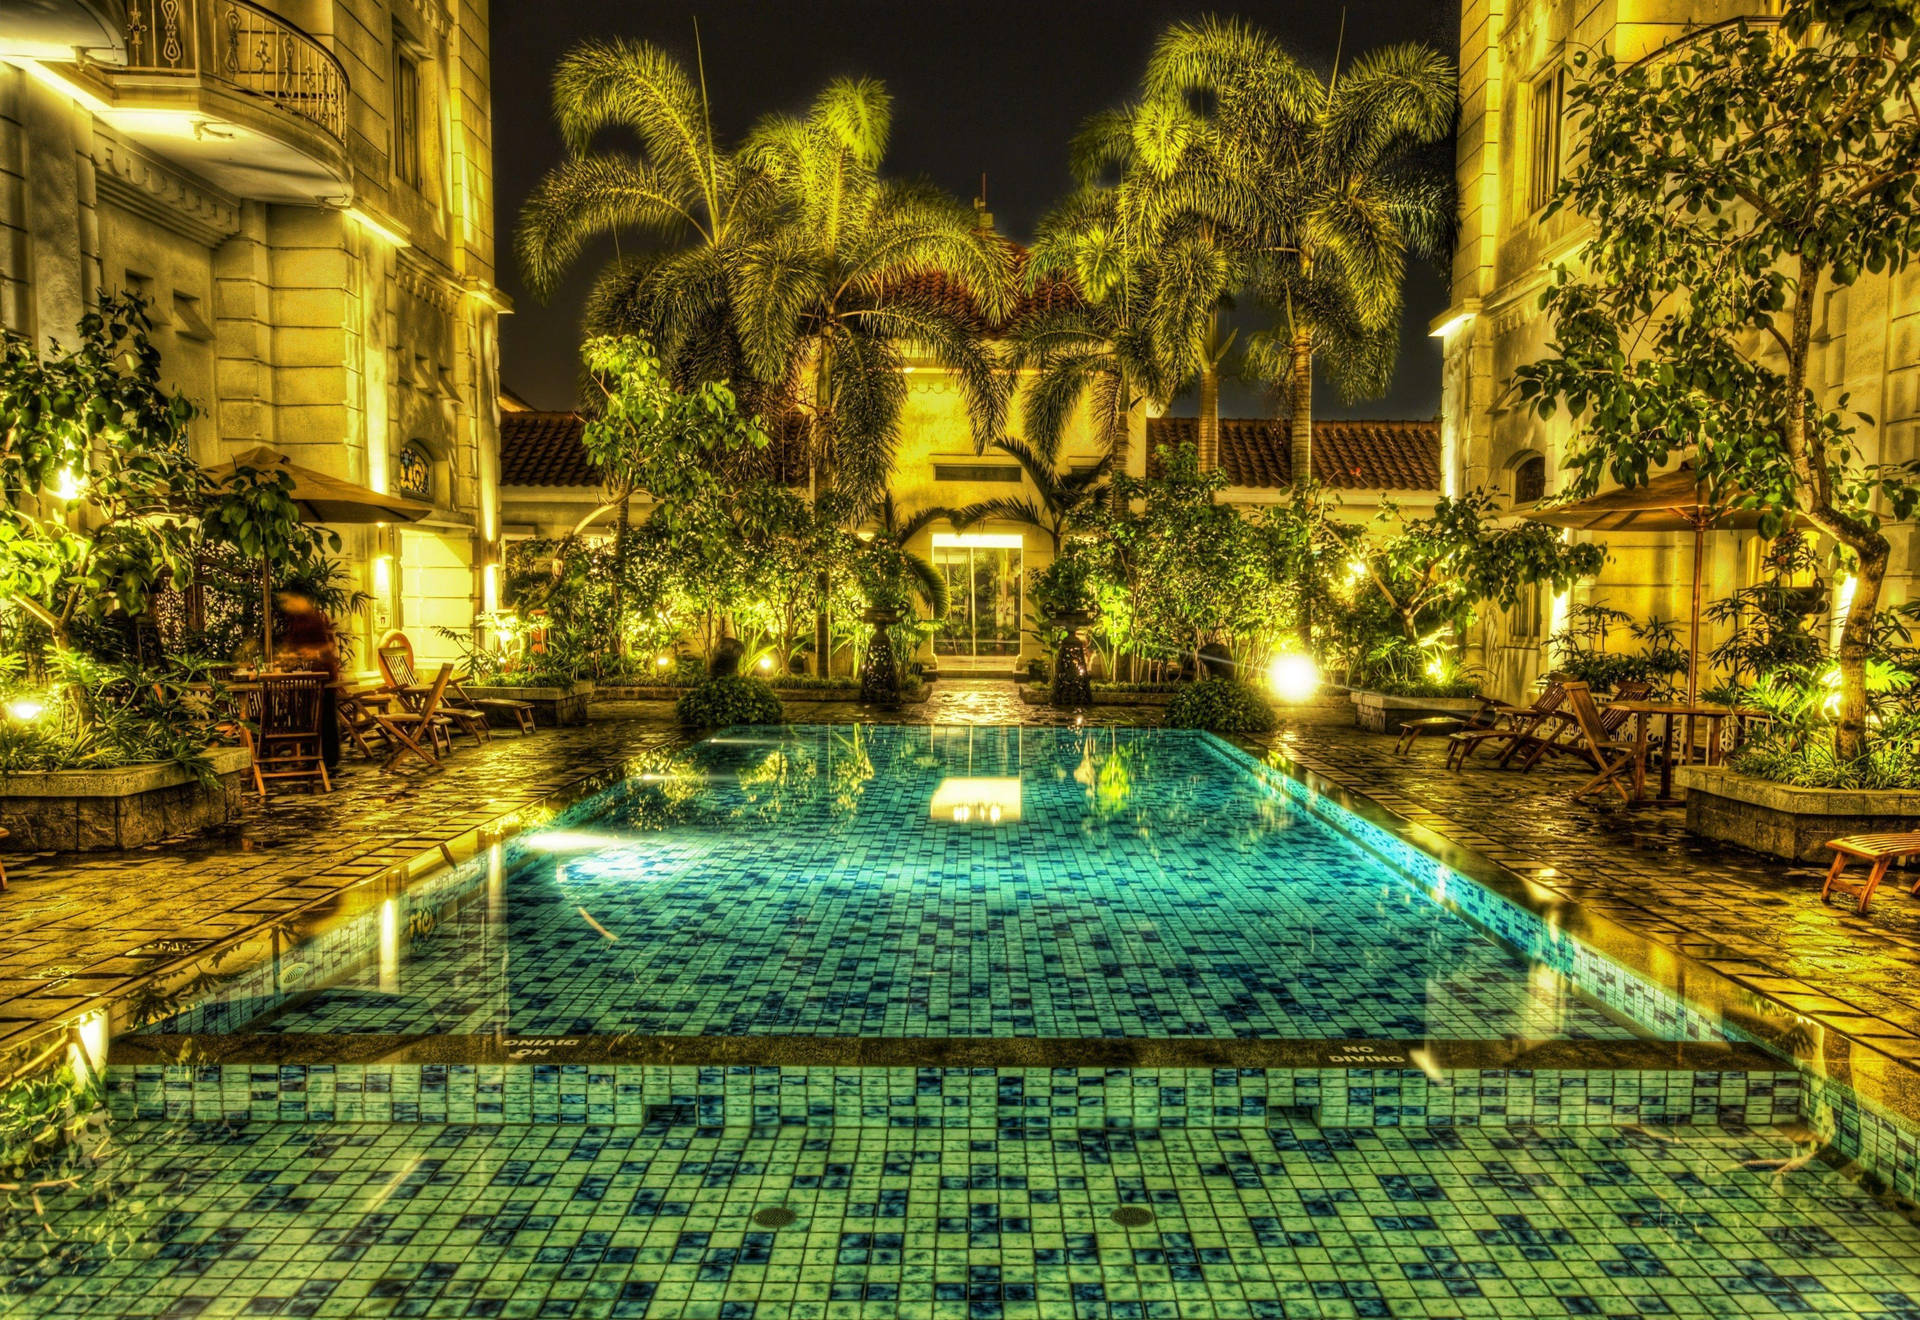 Stunning view of the grand pool in Jakarta, Indonesia. Wallpaper